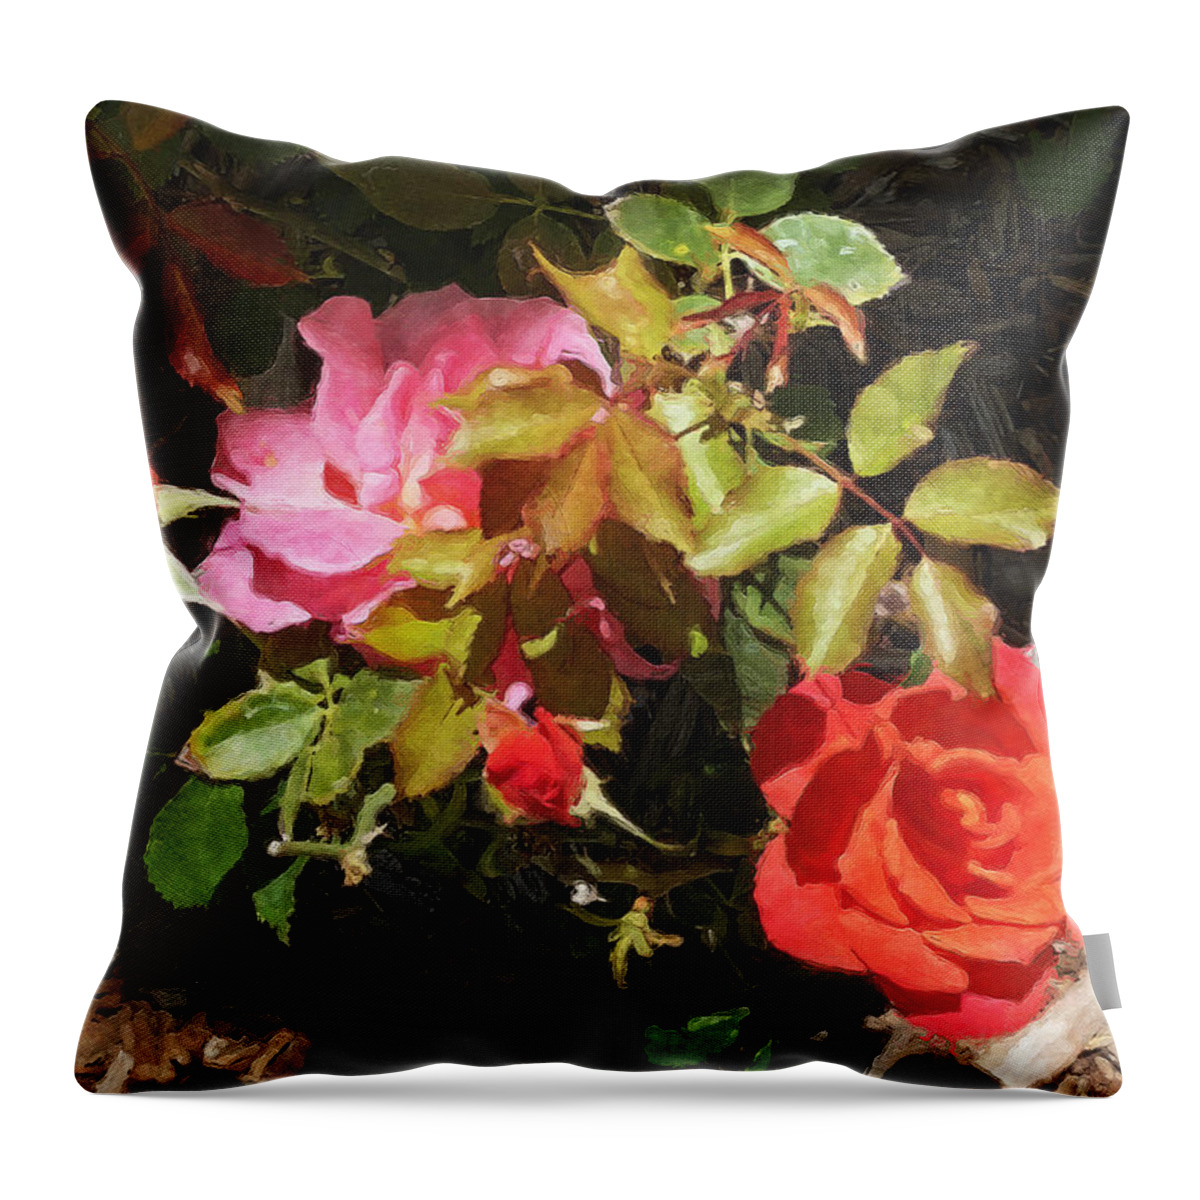 Roses Throw Pillow featuring the photograph Disney Roses Four by Brian Watt